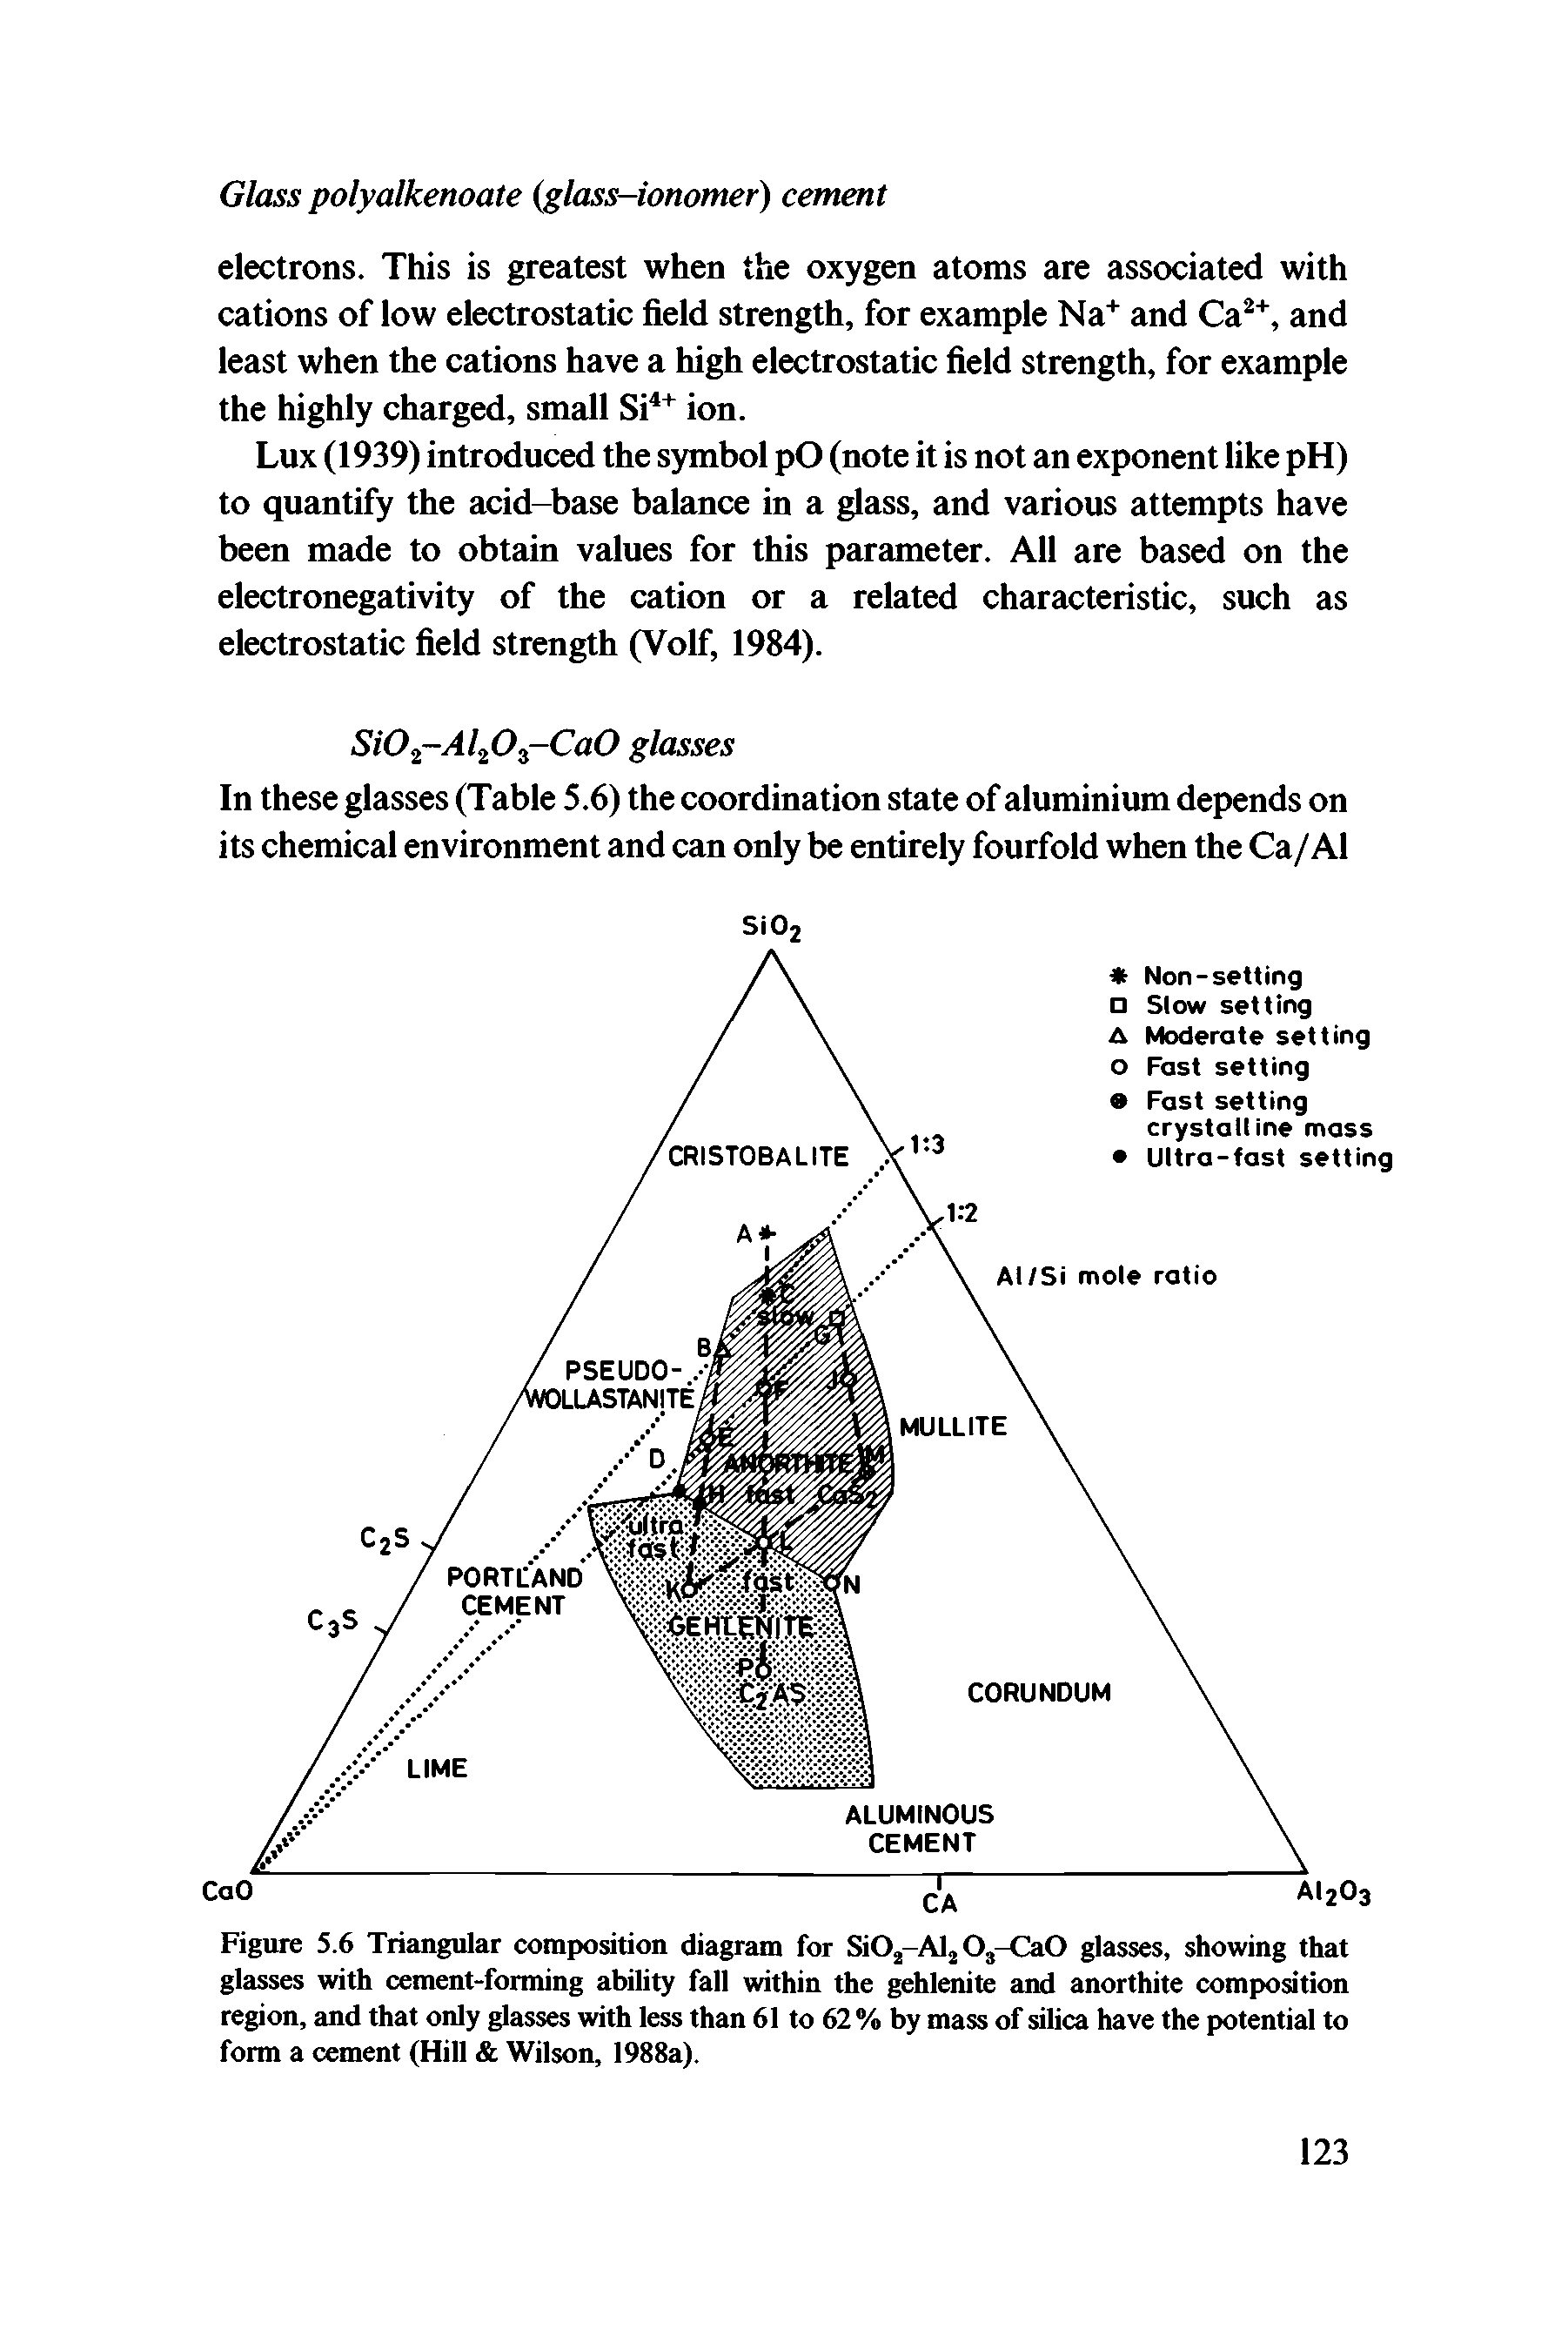 Figure 5.6 Triangular composition diagram for SiO -Alj Oj-CaO glasses, showing that glasses with cement-forming ability fall within the gehlenite and anorthite composition region, and that only glasses with less than 61 to 62% by mass of silica have the potential to form a cement (Hill Wilson, 1988a).